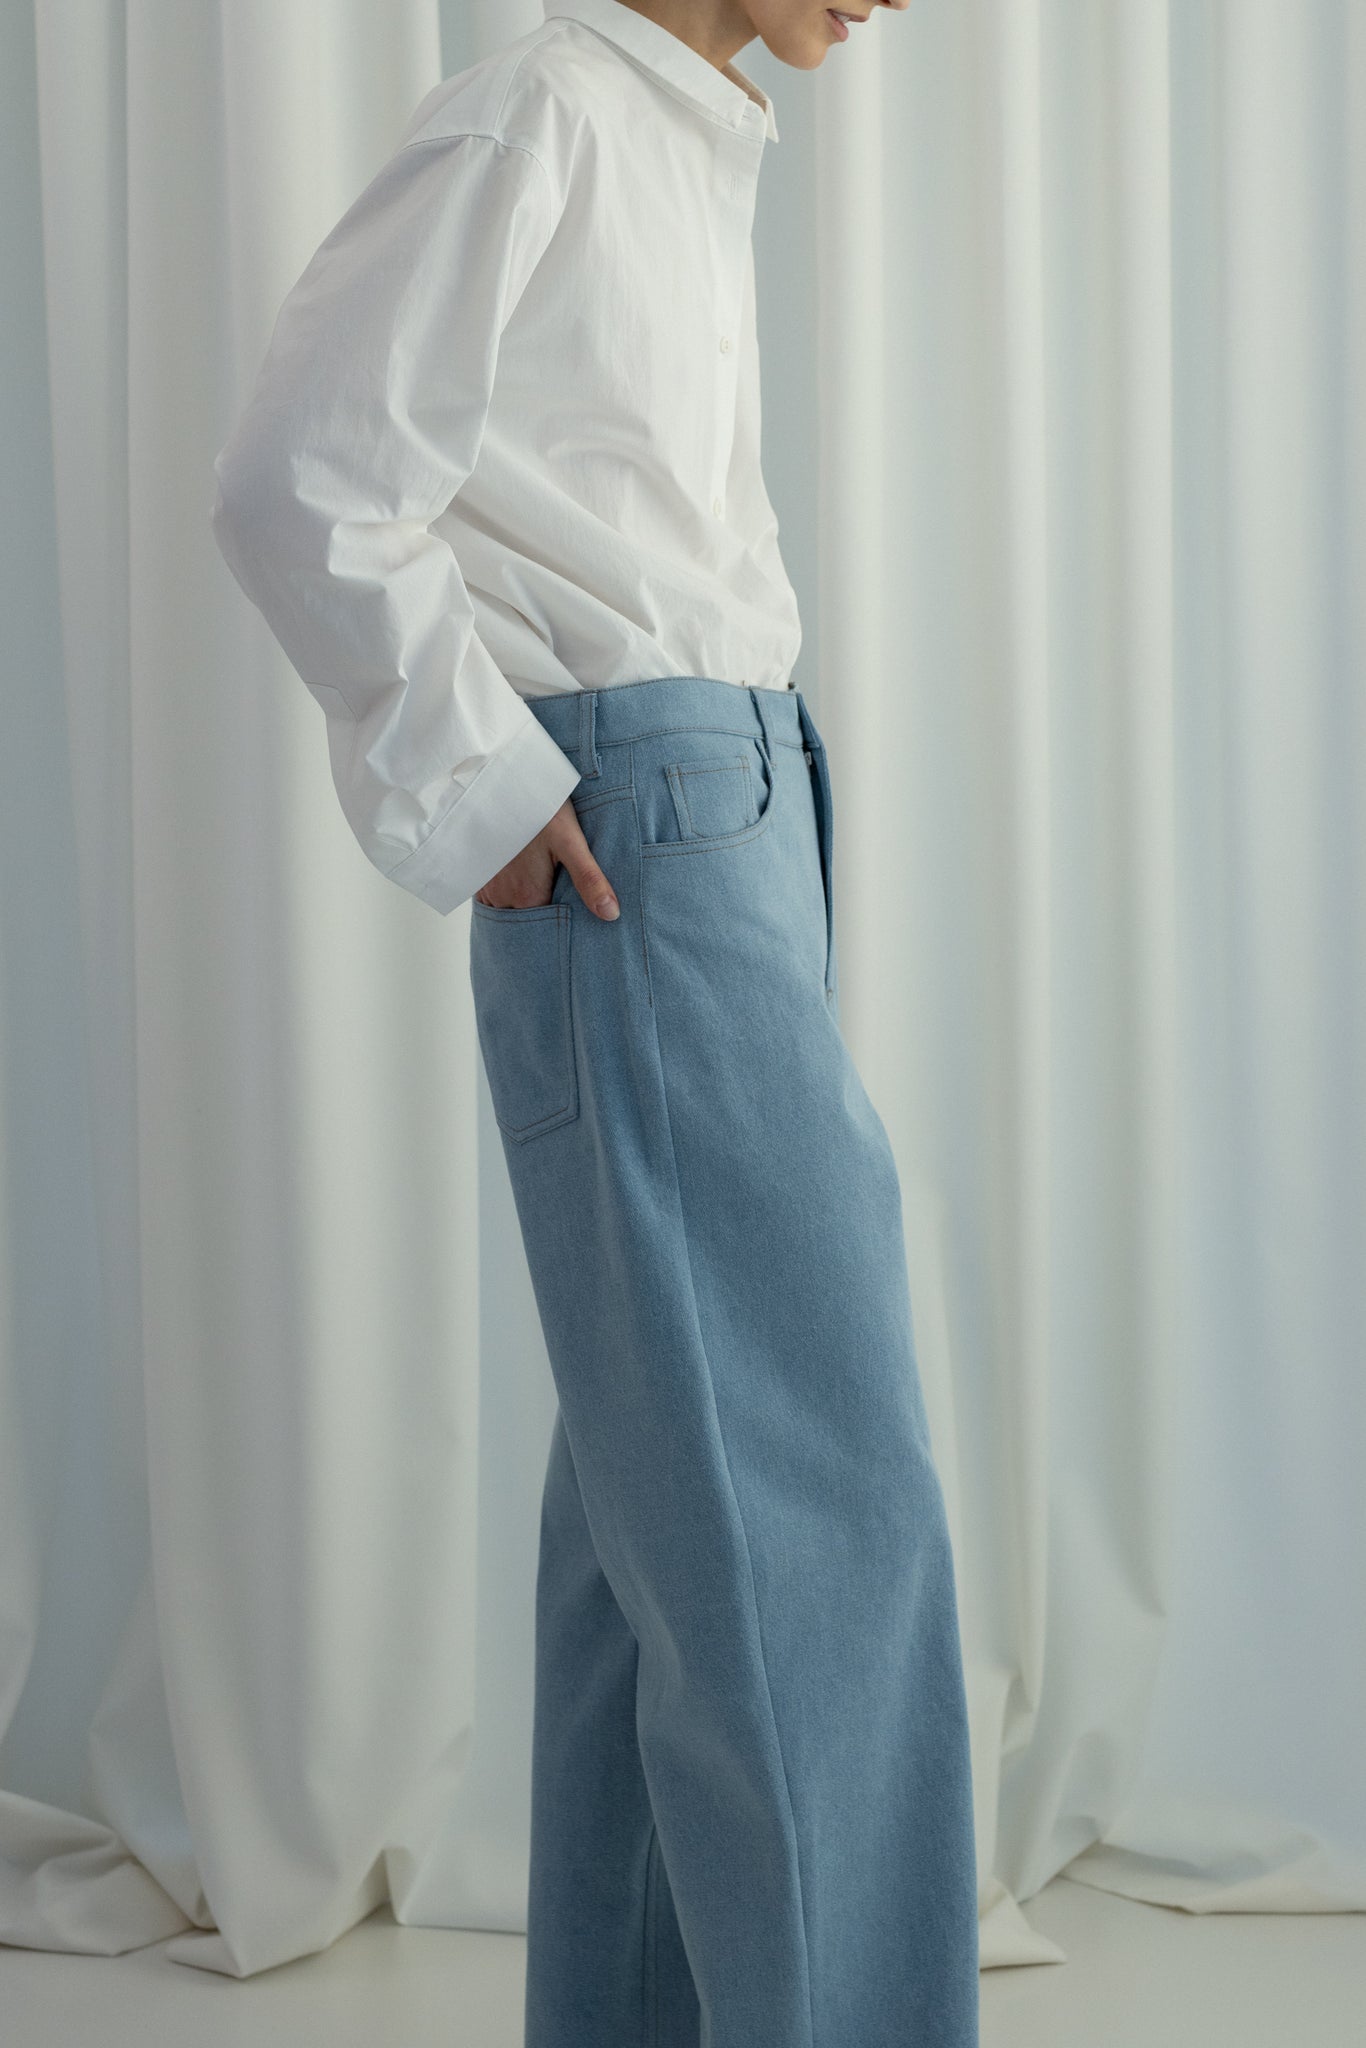 BAGGY JEANS IN LIGHT BLUE